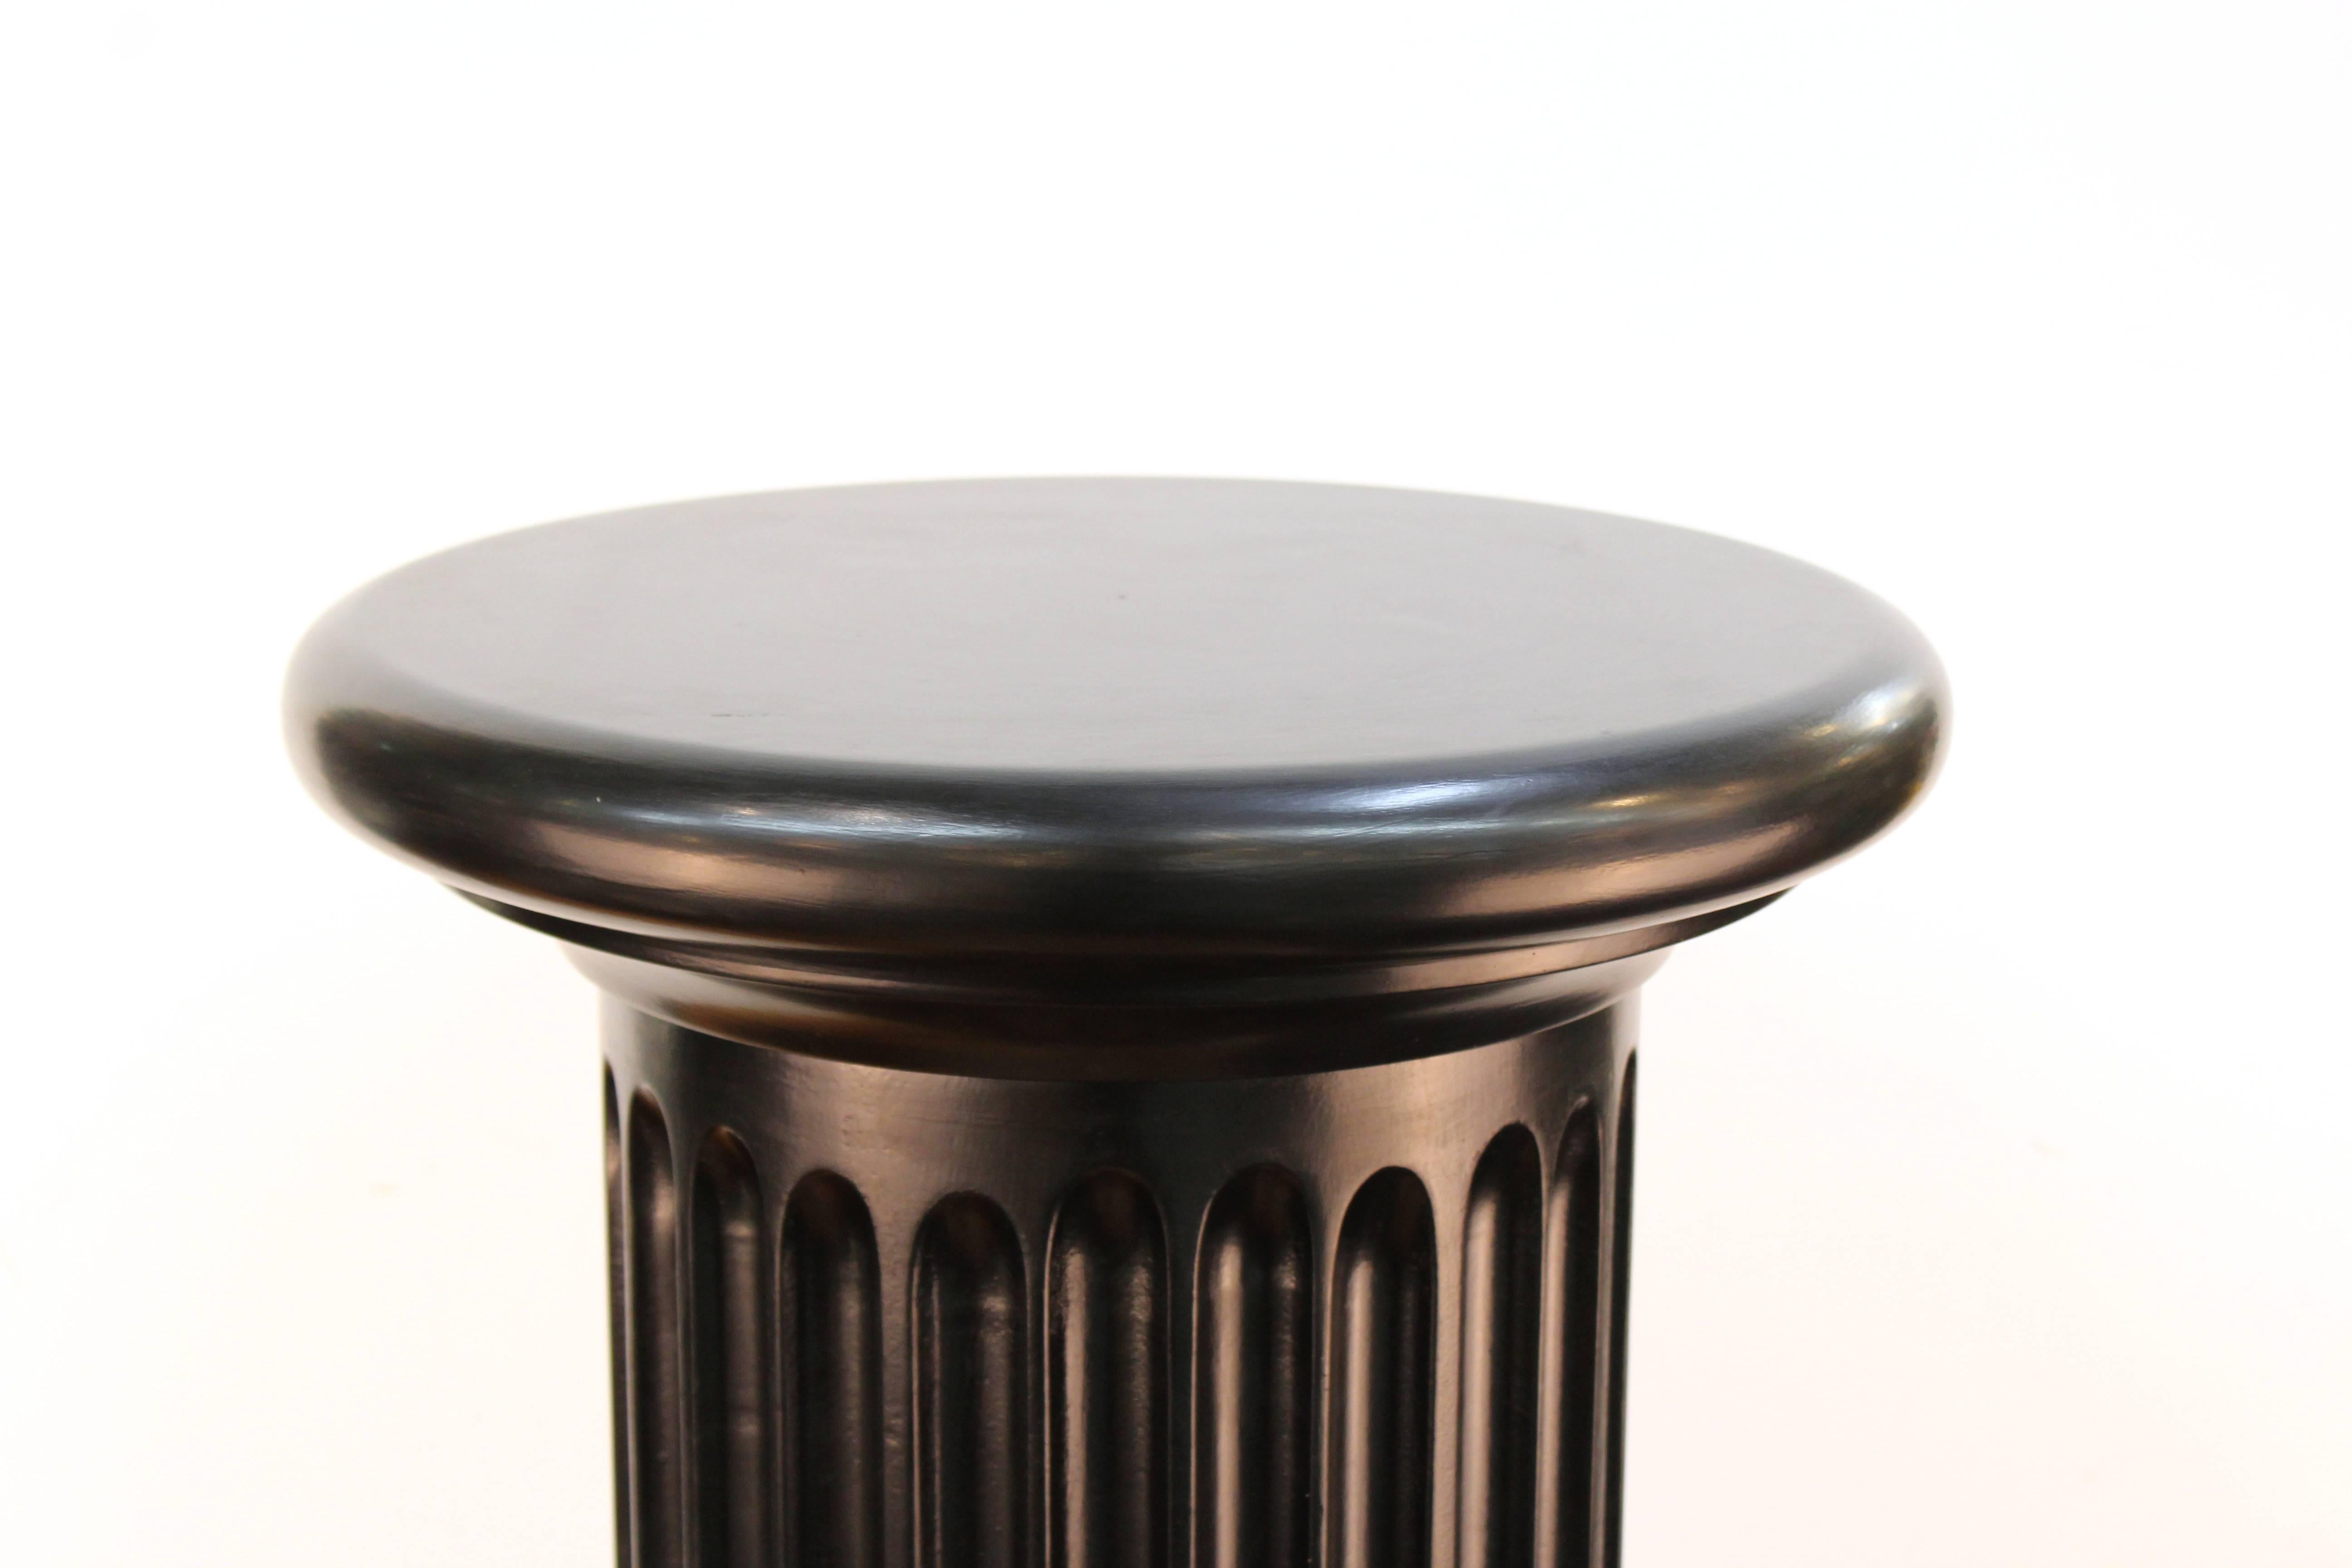 Two tall fluted columns in ebonized wood. Each Doric-style column has a base, fluted shaft, and capital all in ebonized wood with a smooth finish. The pair remains in excellent condition, consistent with age and use. The included measurements are